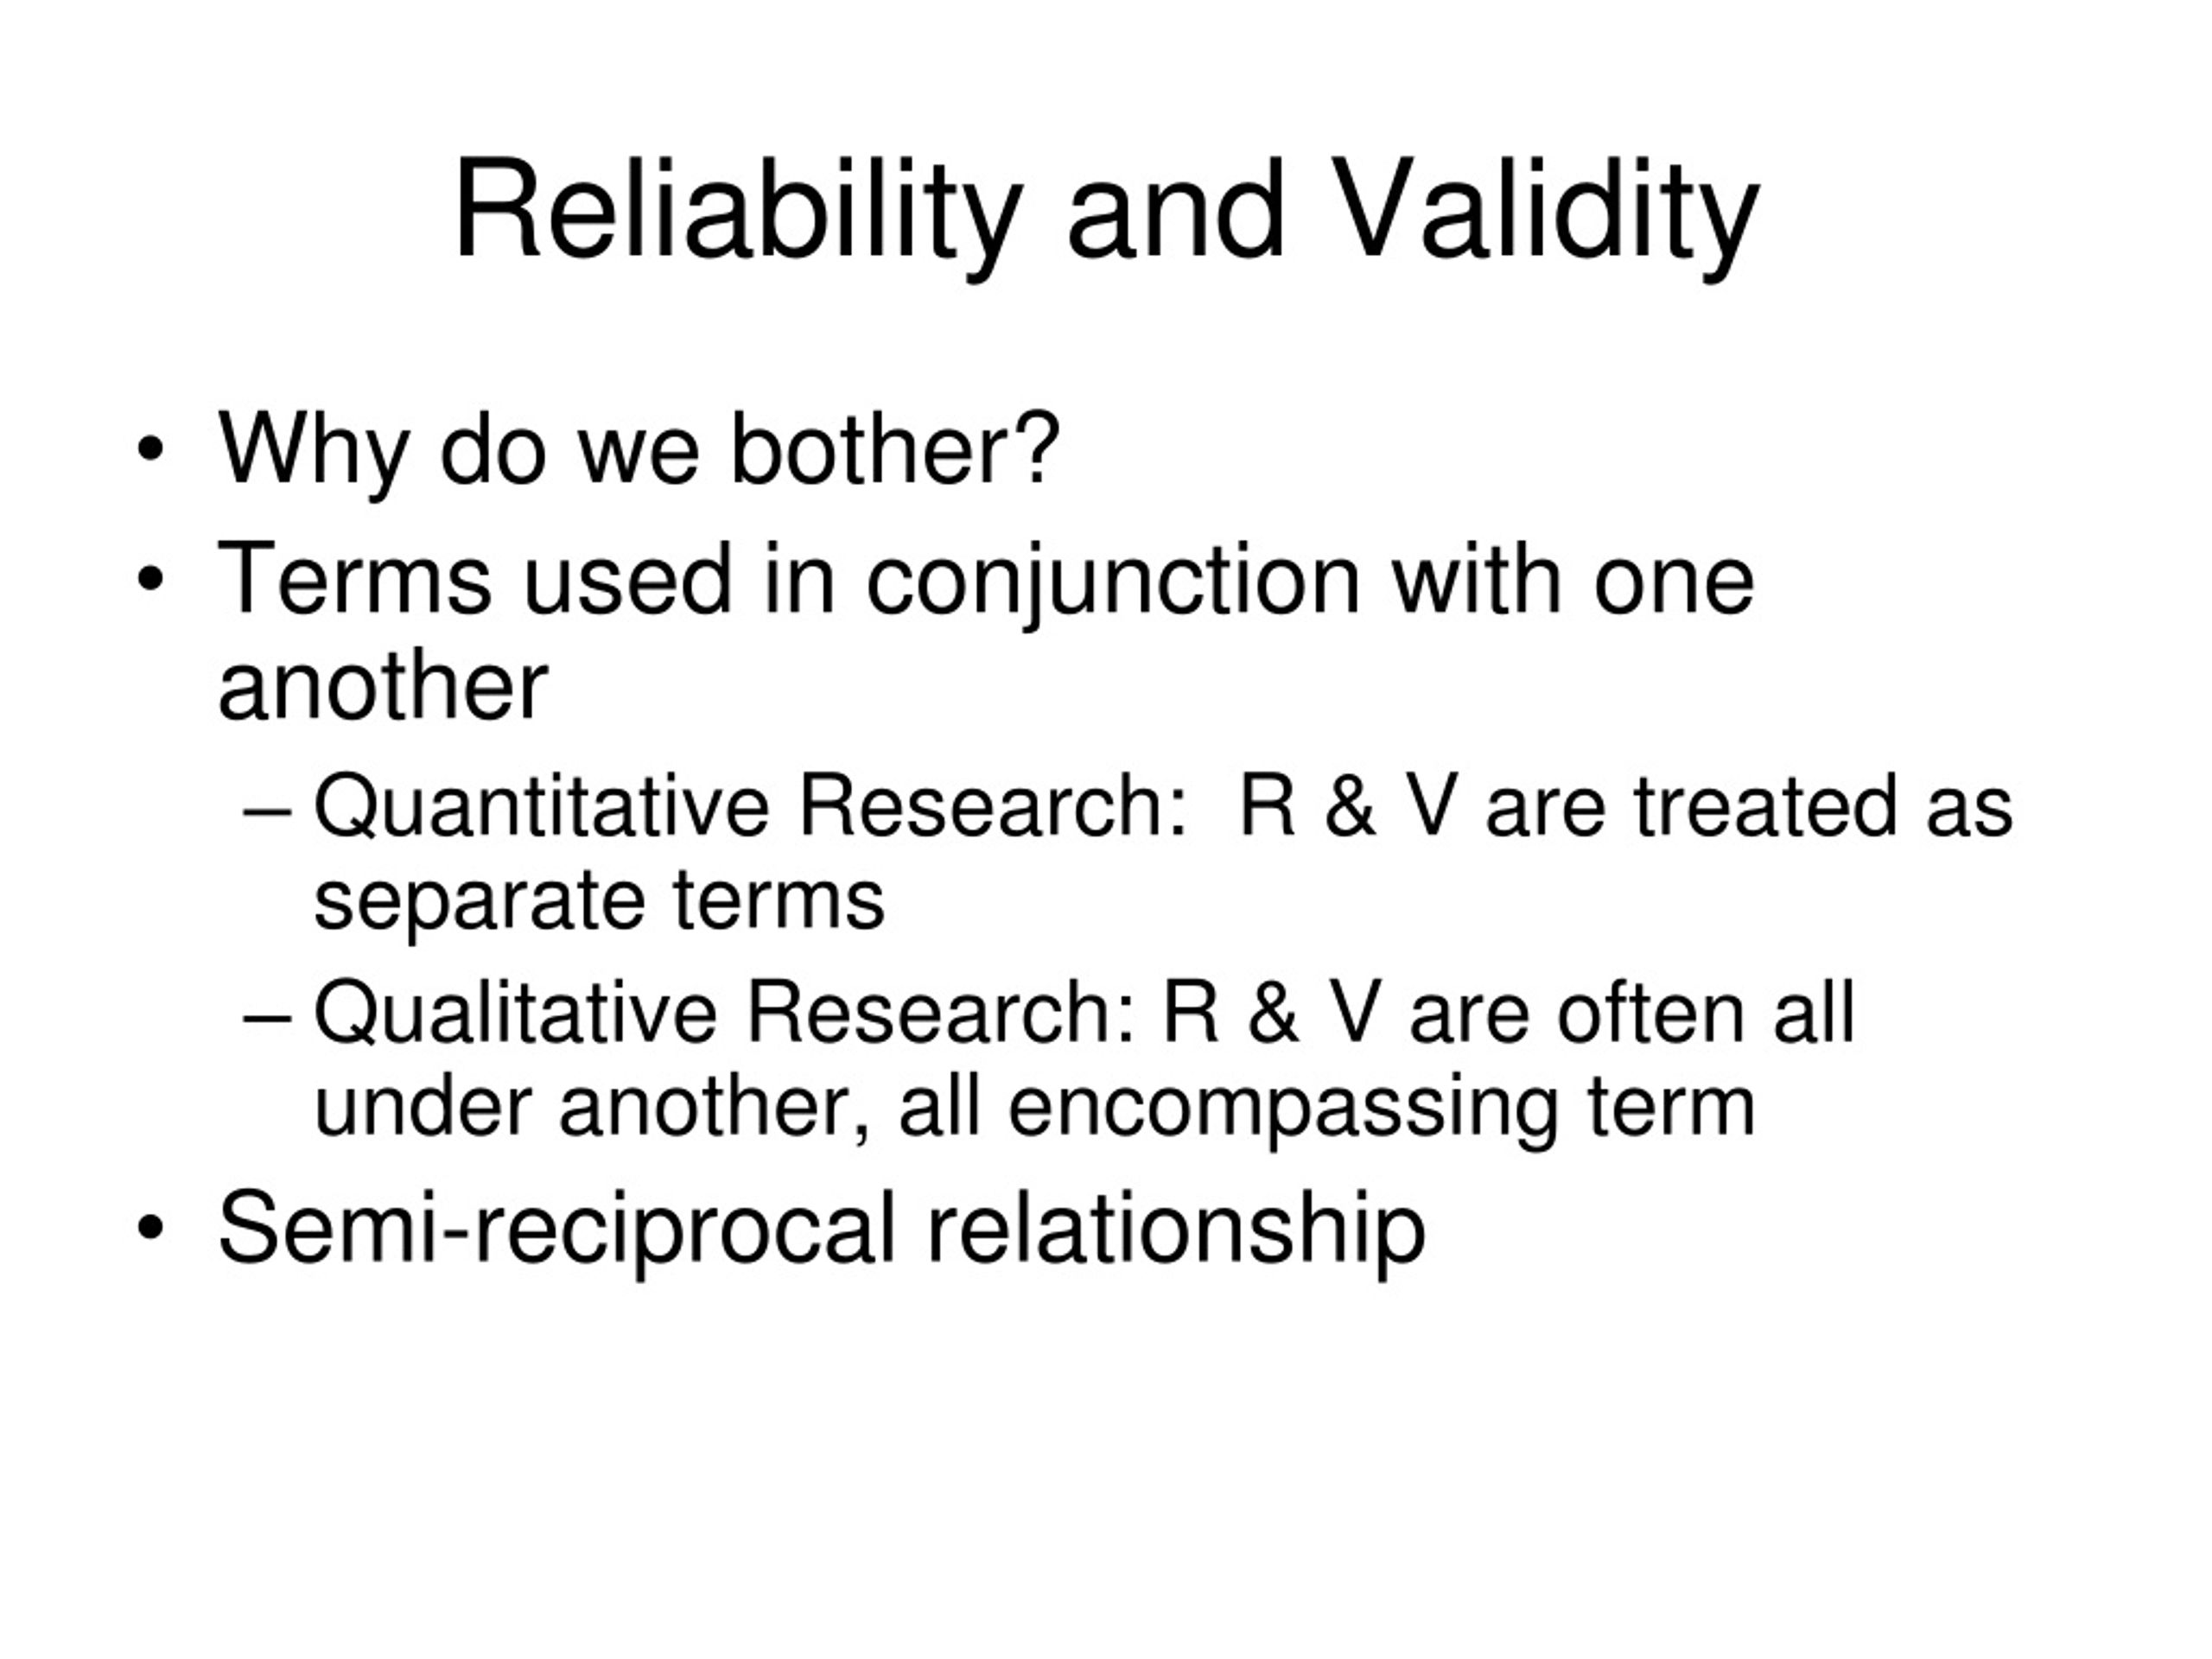 epds reliability and validity